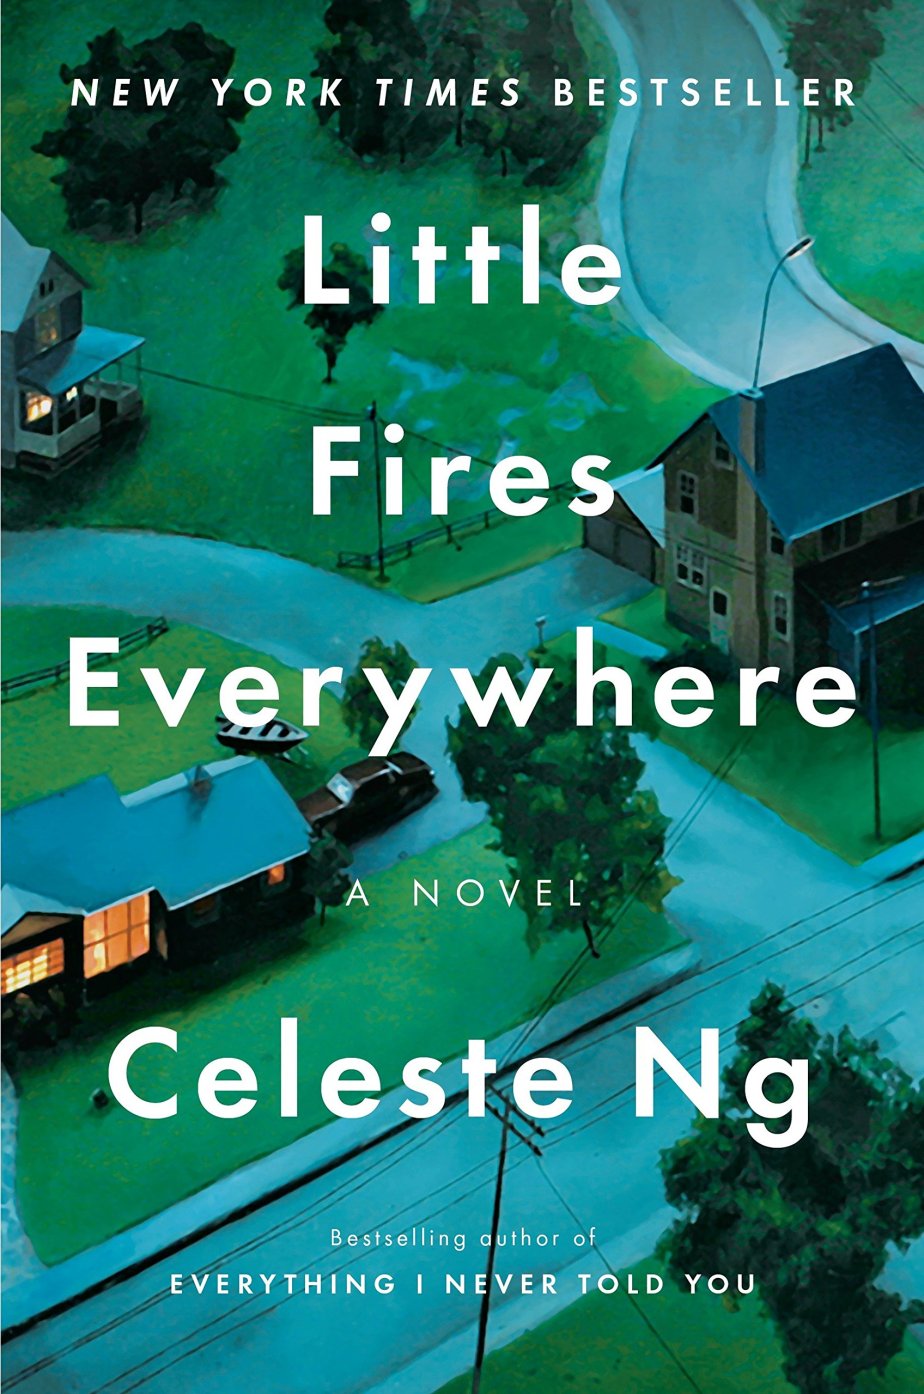 Book Review: Little Fires Everywhere